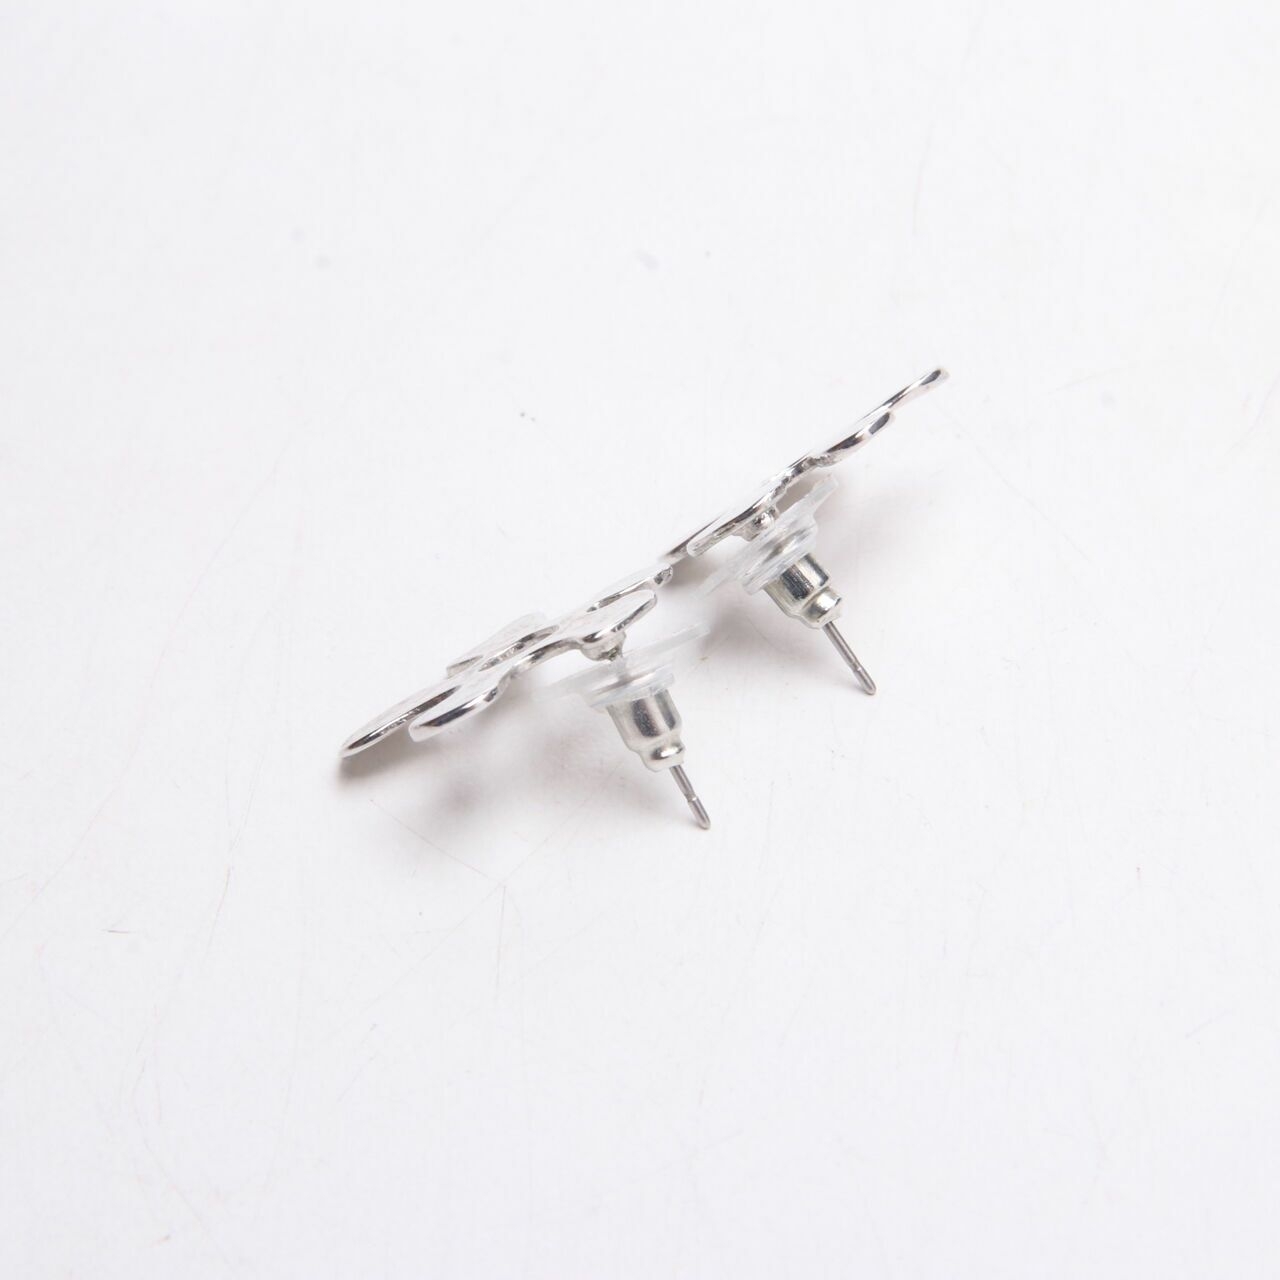 Private Collection Silver Earrings